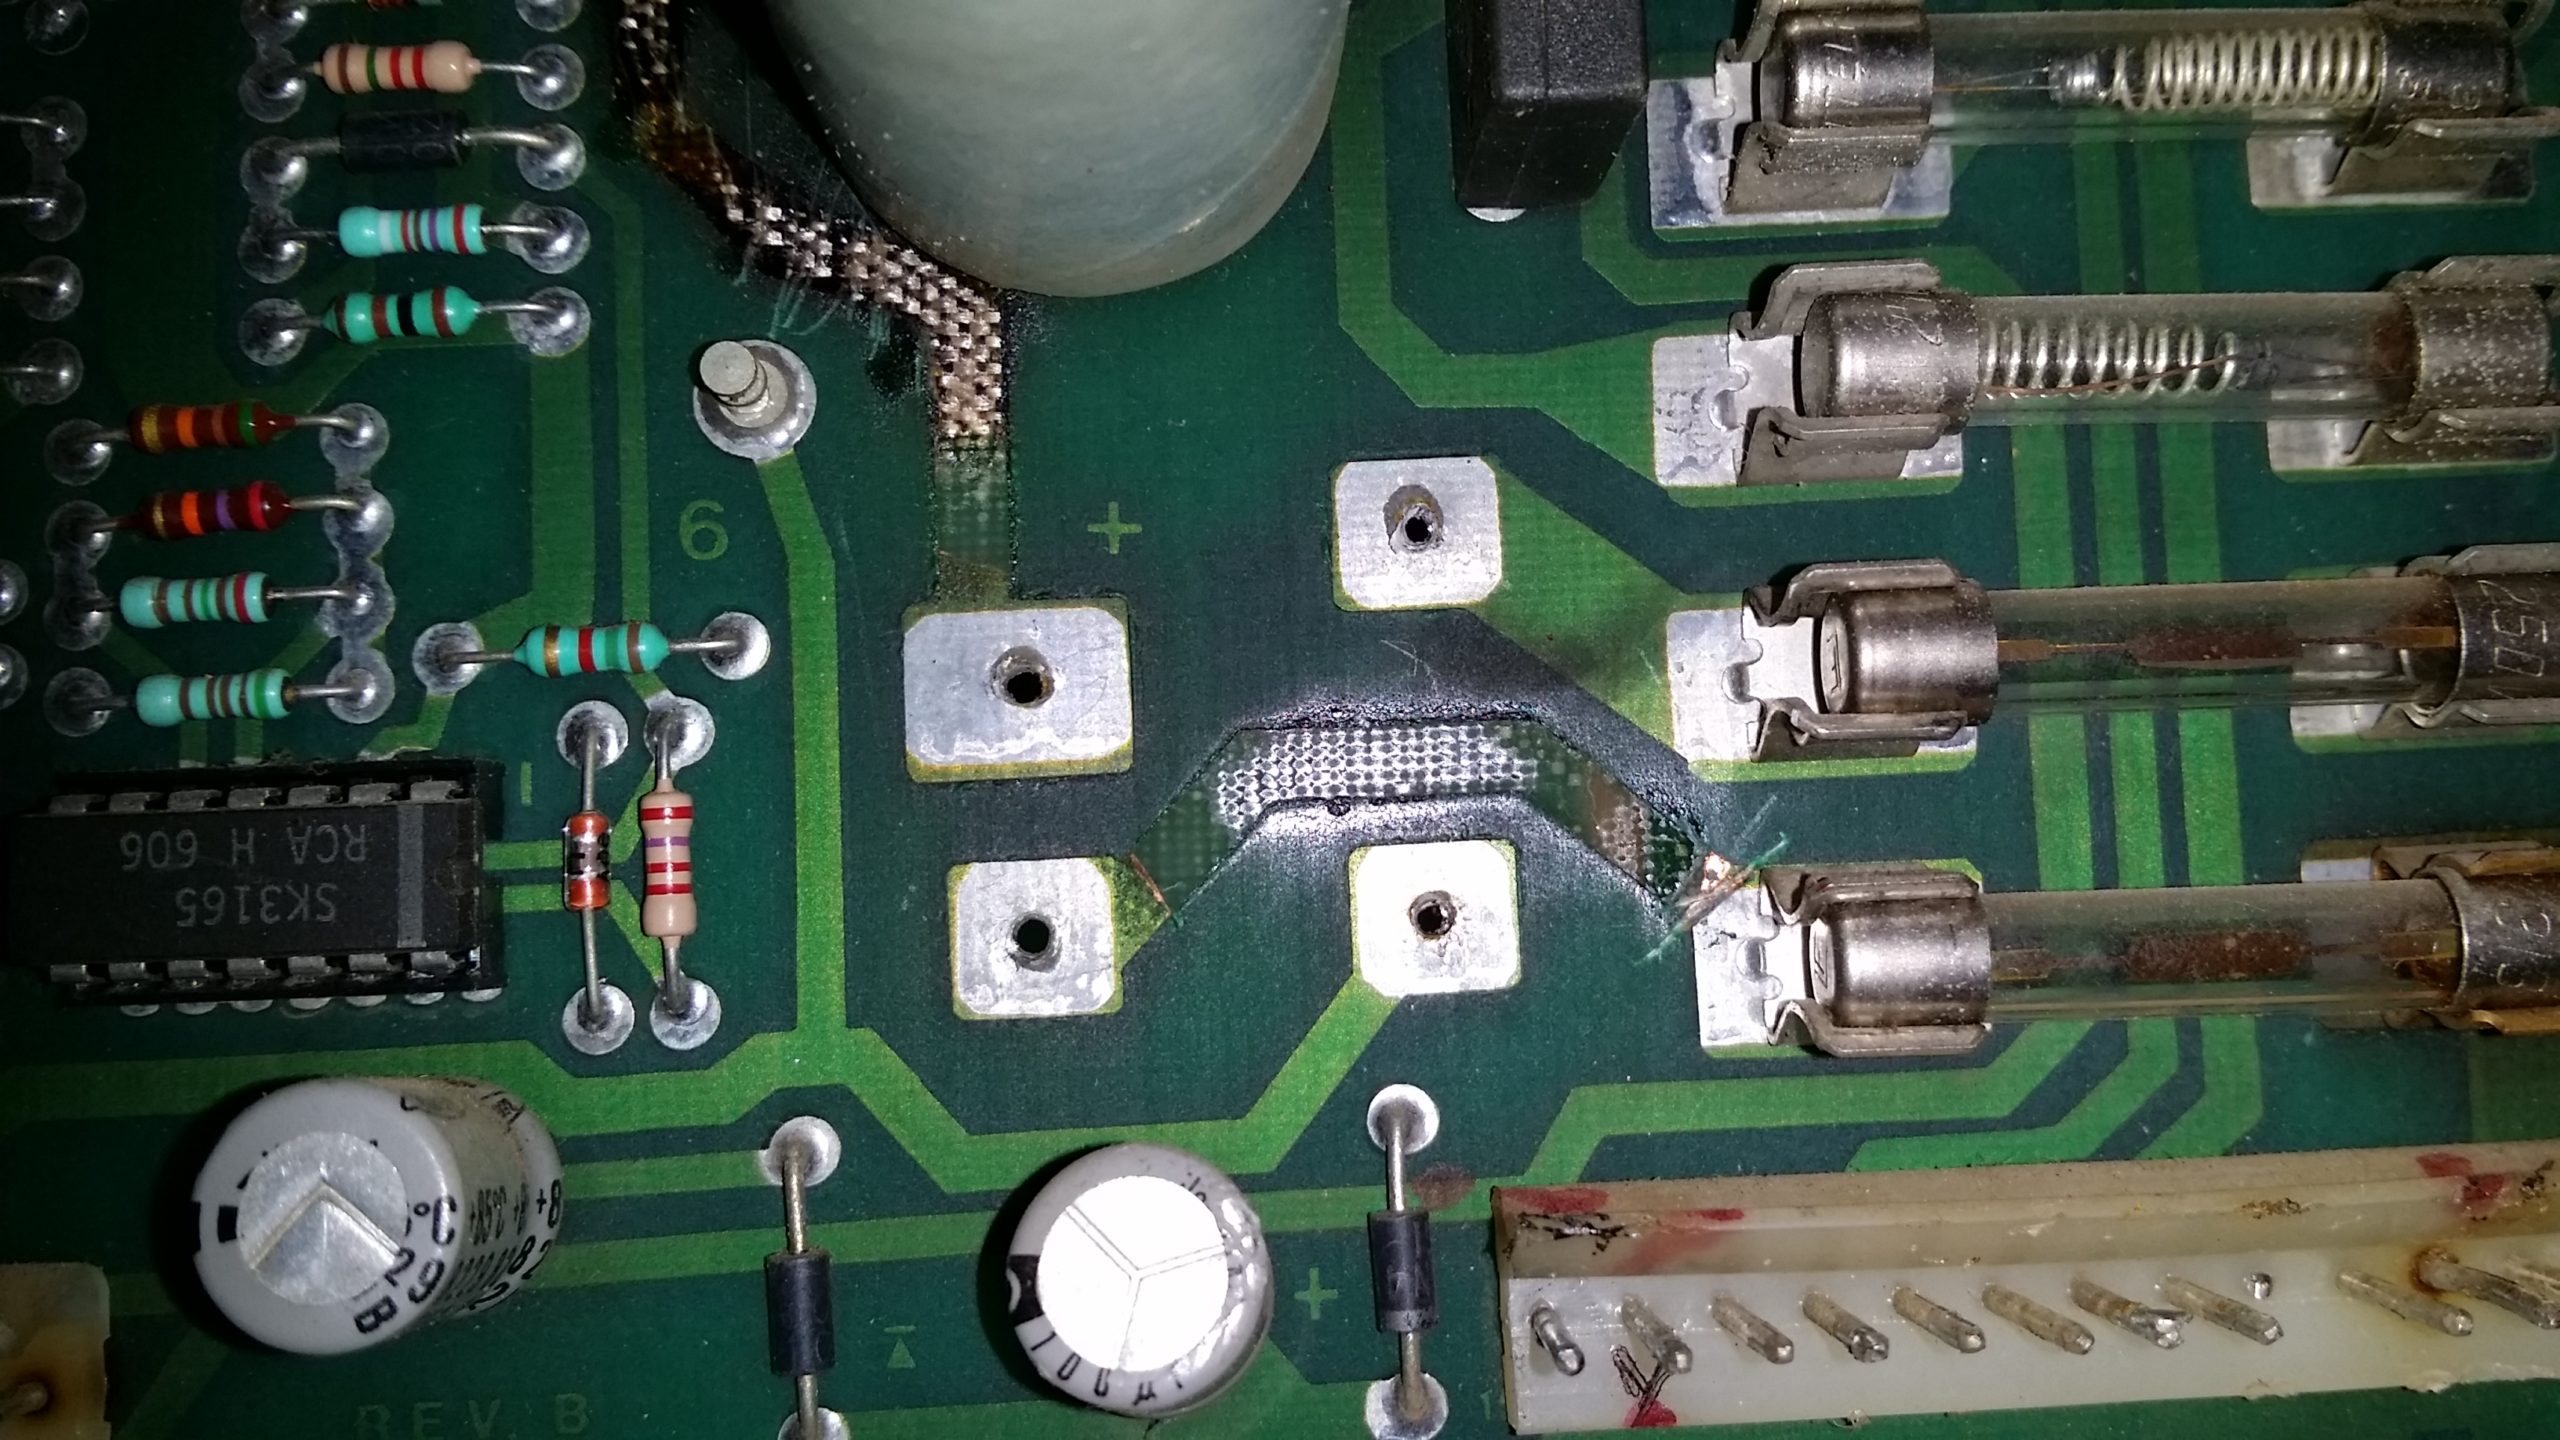 Joust power board with bridge rectifier removed